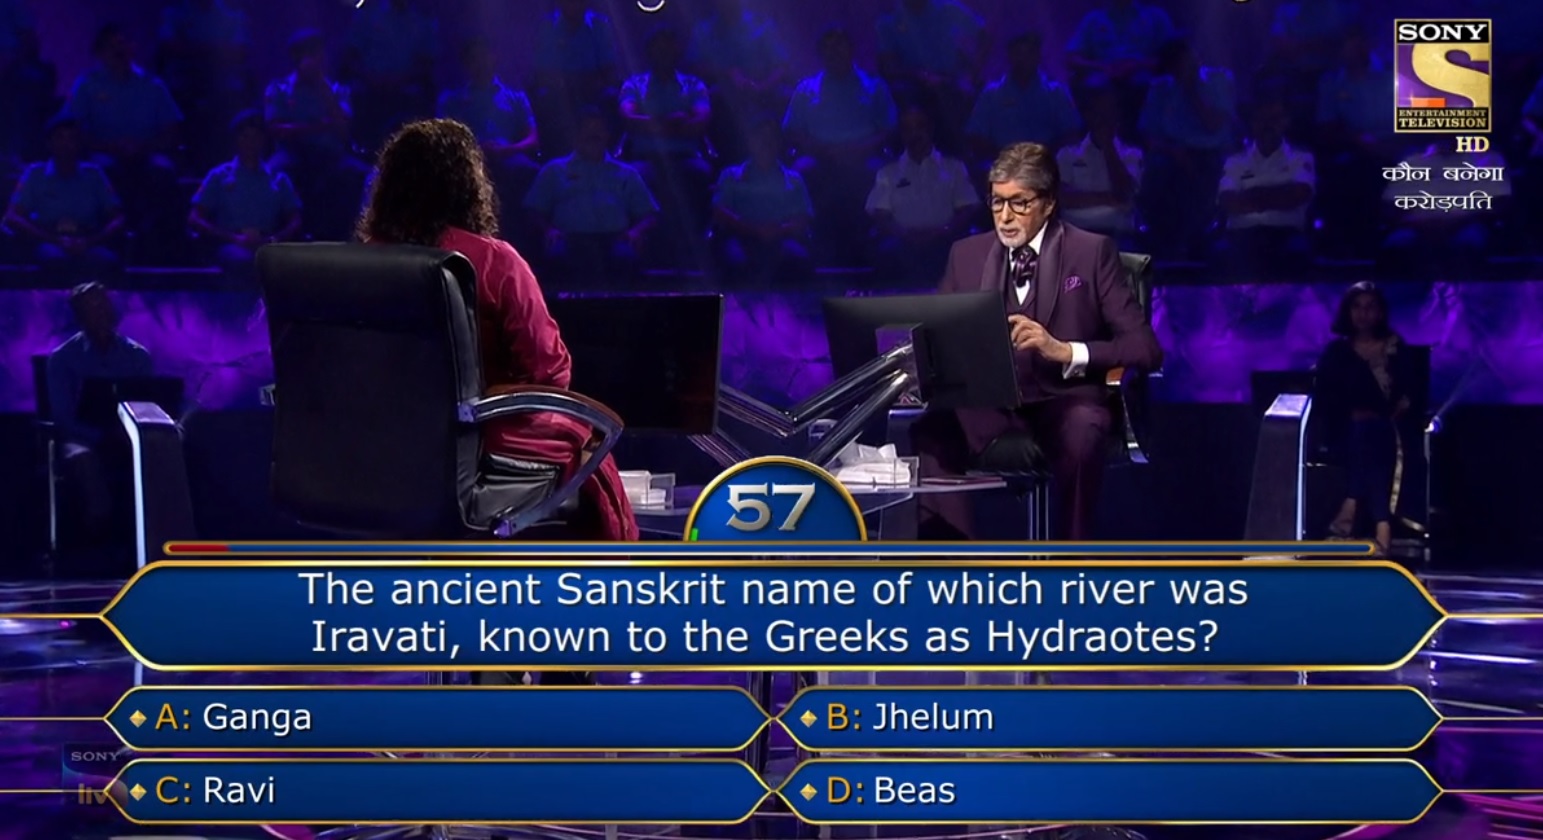 Ques : The ancinet Sanaskrit name of which river was Iravati, known to the Greeks as Hydraotes?